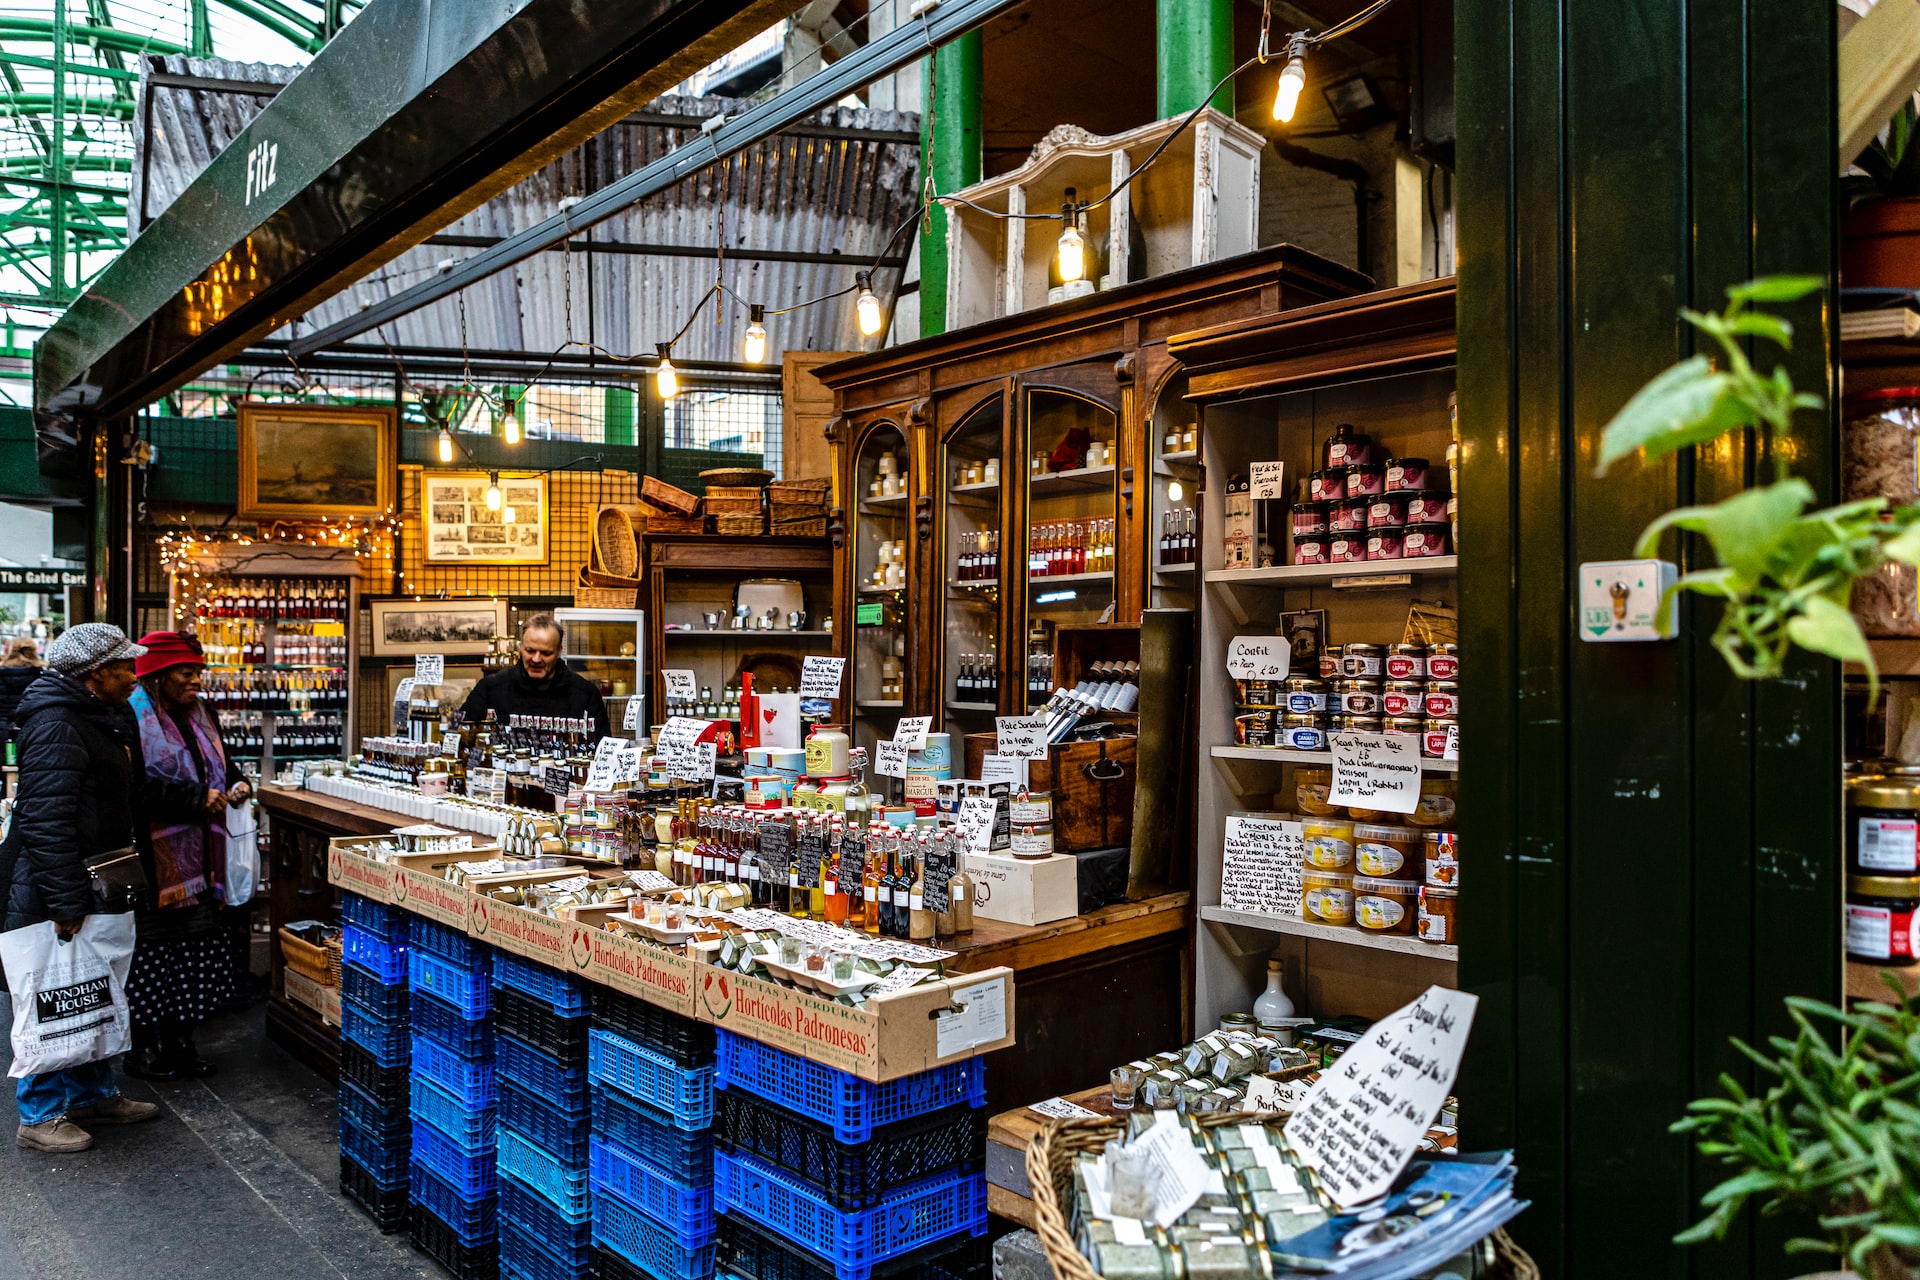 Best Free Things to do in London - Borough Market